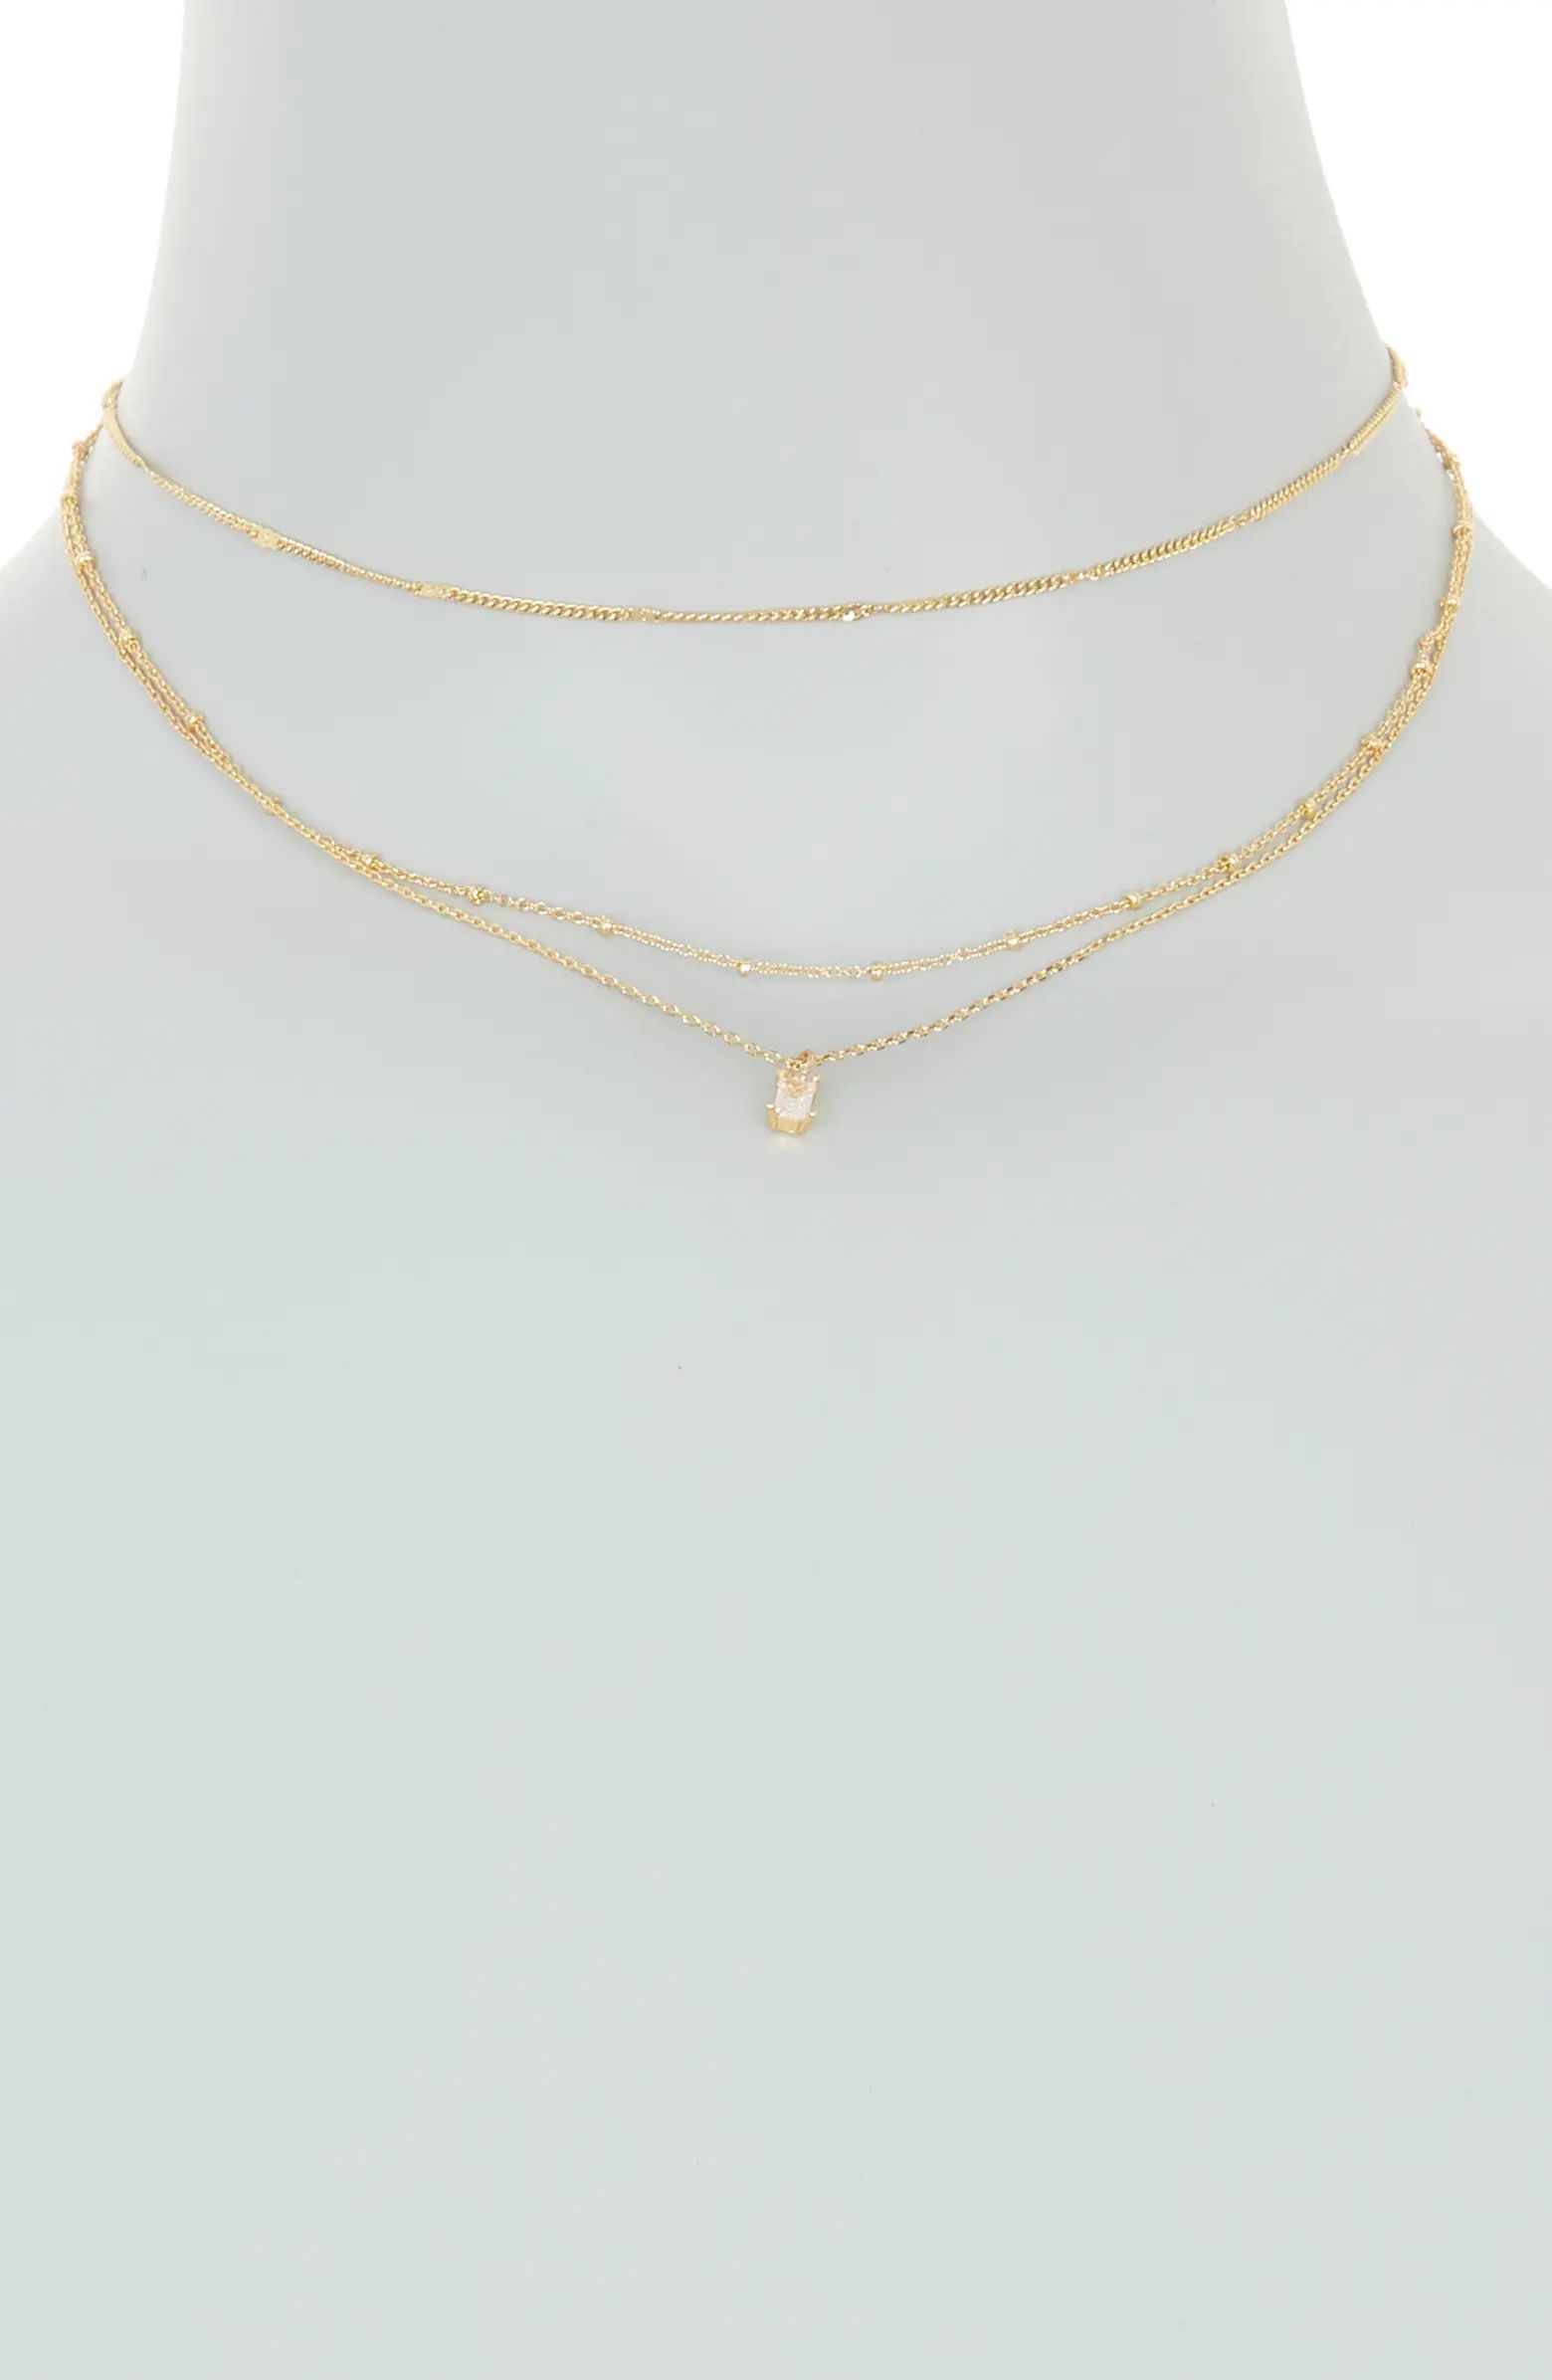 BP. 14K Gold Dipped Layered Rhinestone Pendant Necklace | Nordstrom | Nordstrom